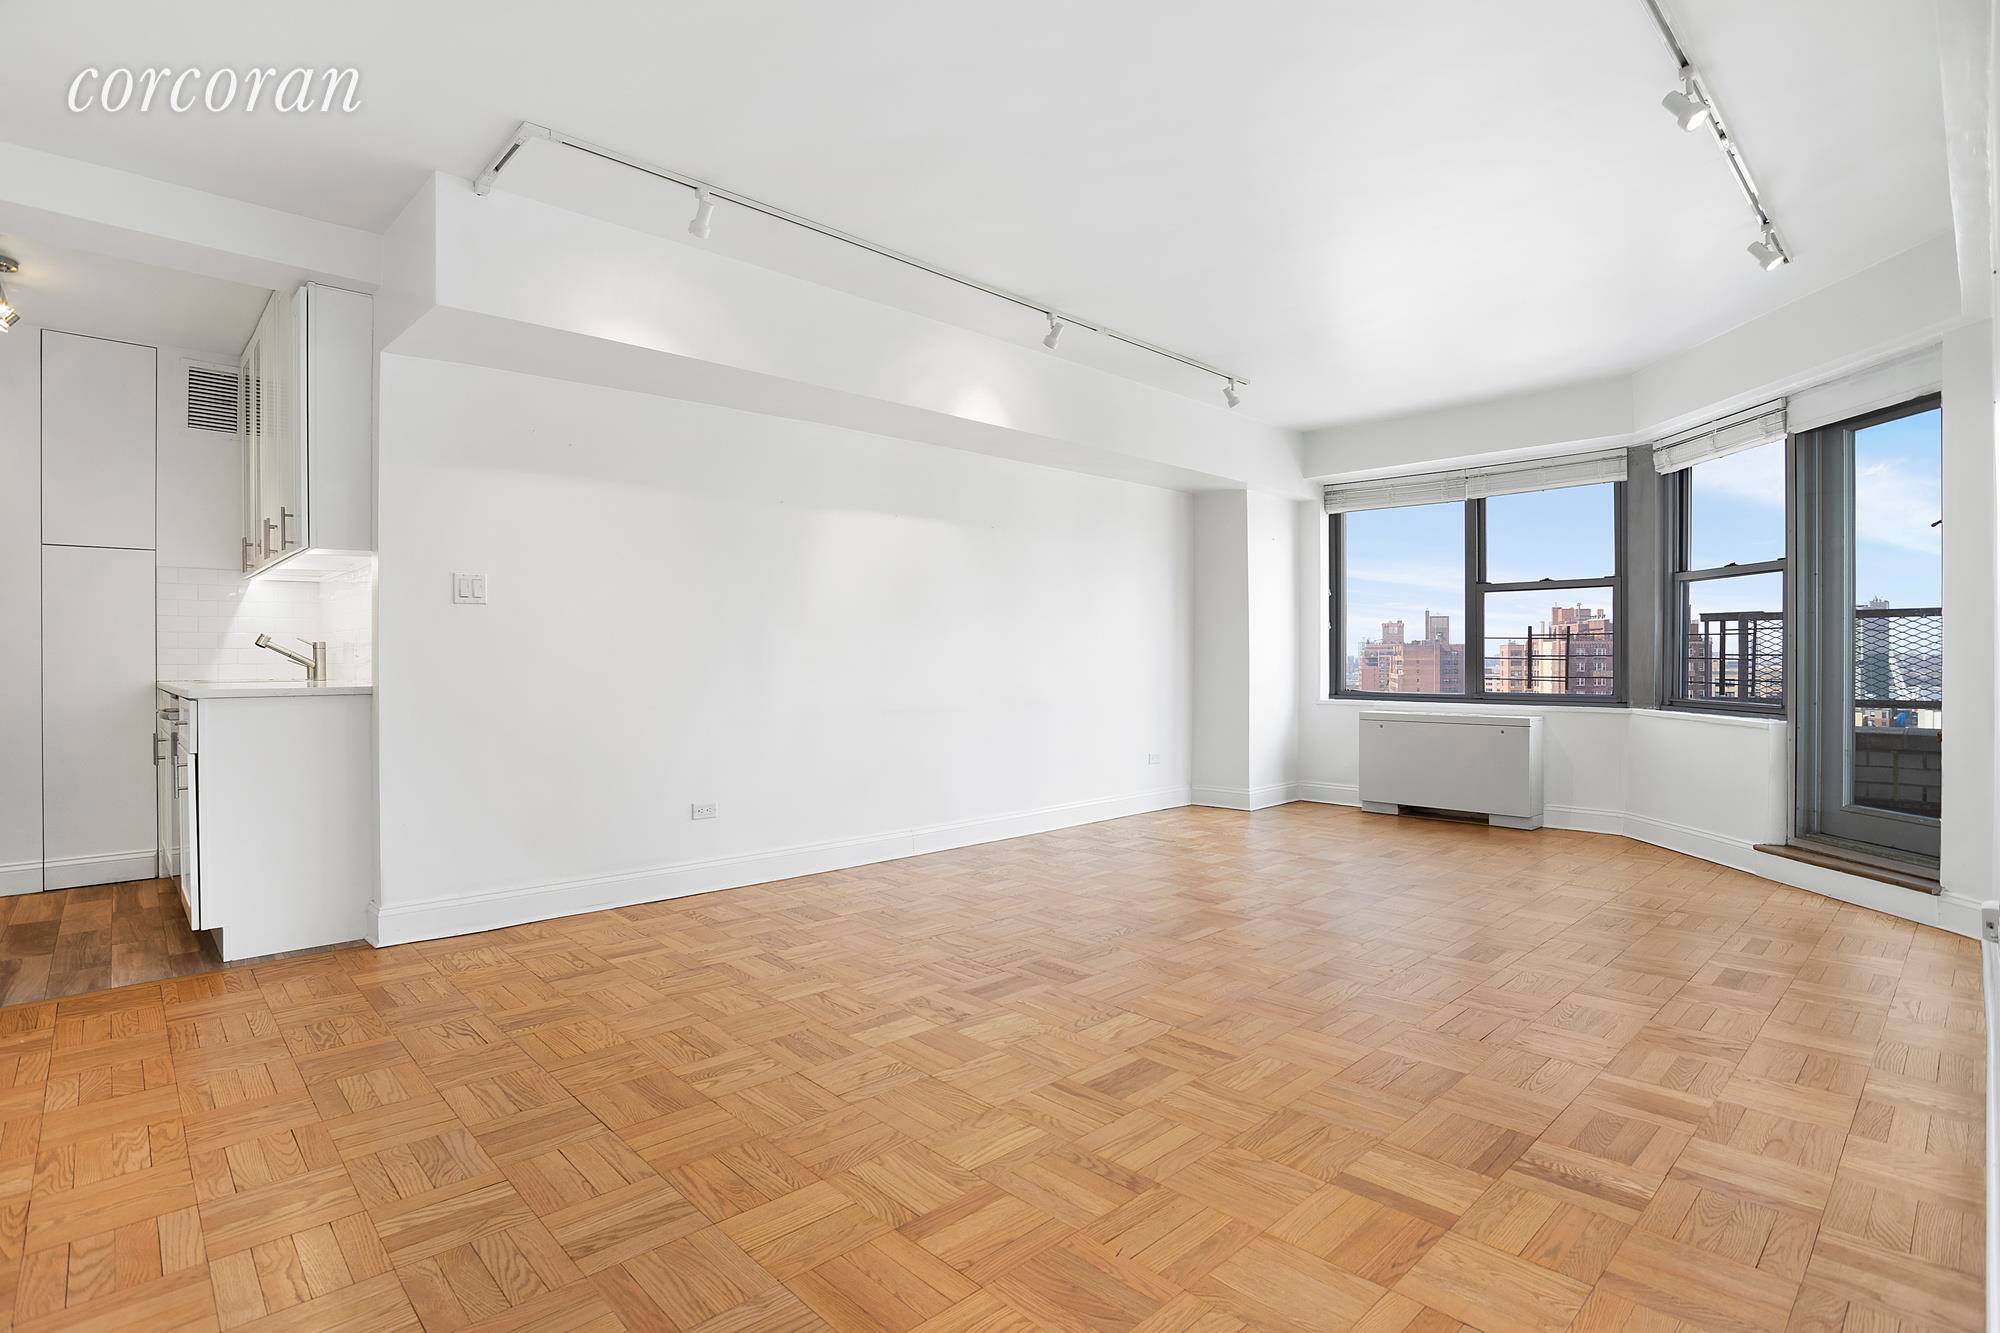 Residence 17E is a bright spacious one bedroom with a terrace with North, South and West exposures of city views, sunsets, the Hudson River and Hudson Yards to the North.